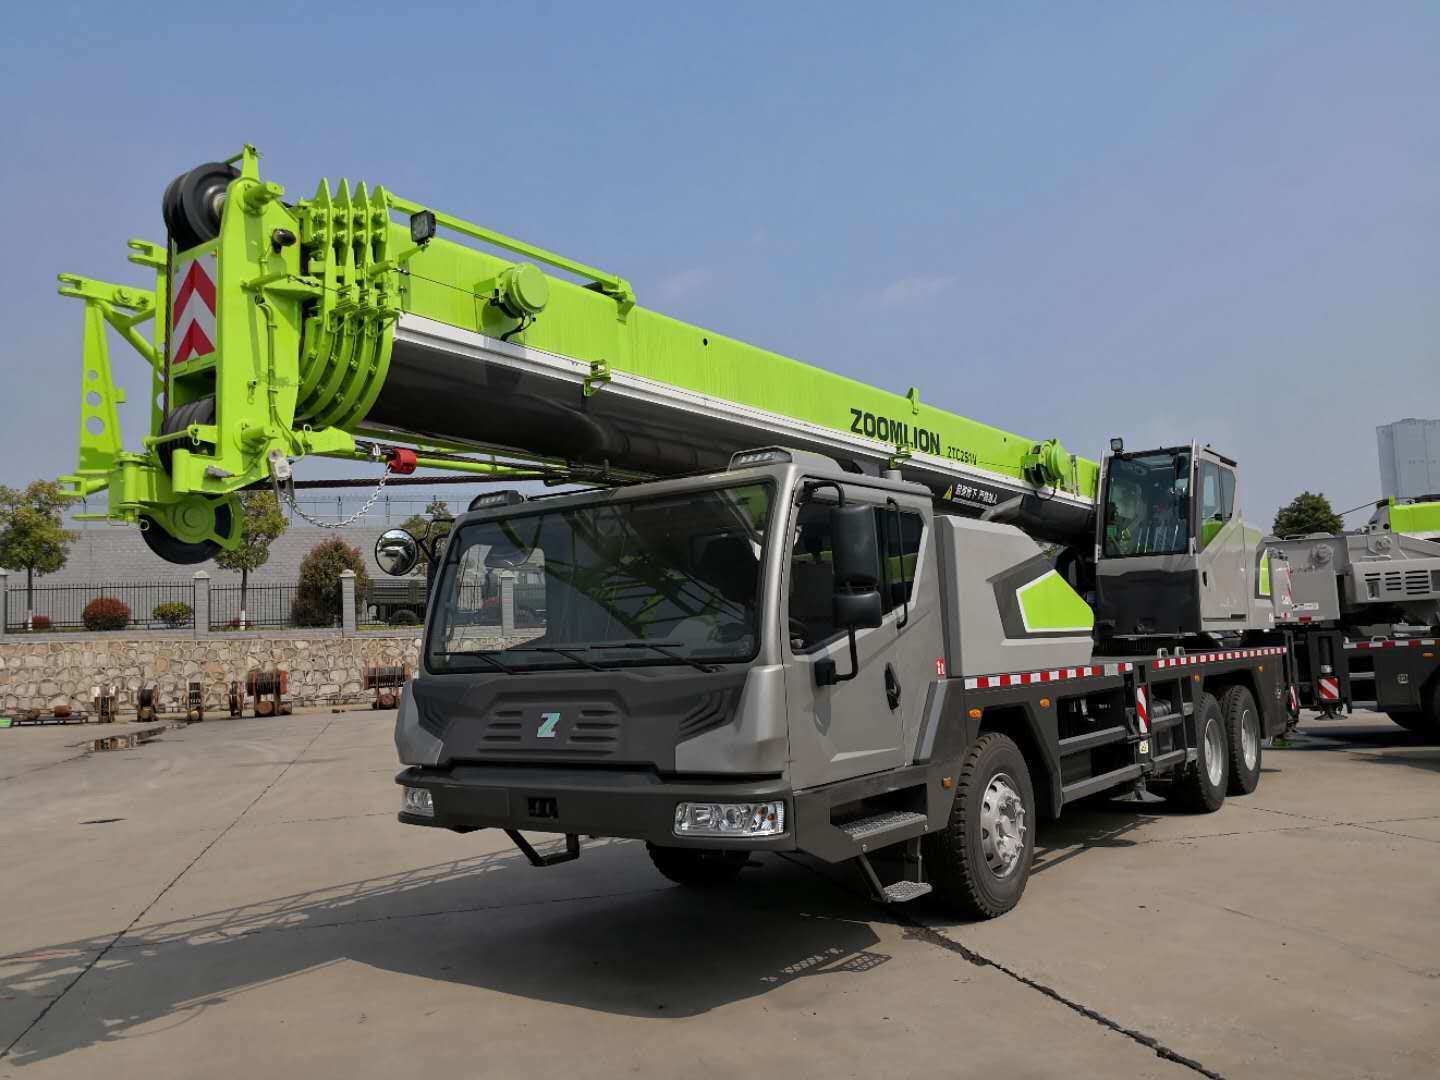 Zoomlion Qy25V552 Chinese 25 Ton Truck Crane for Sale